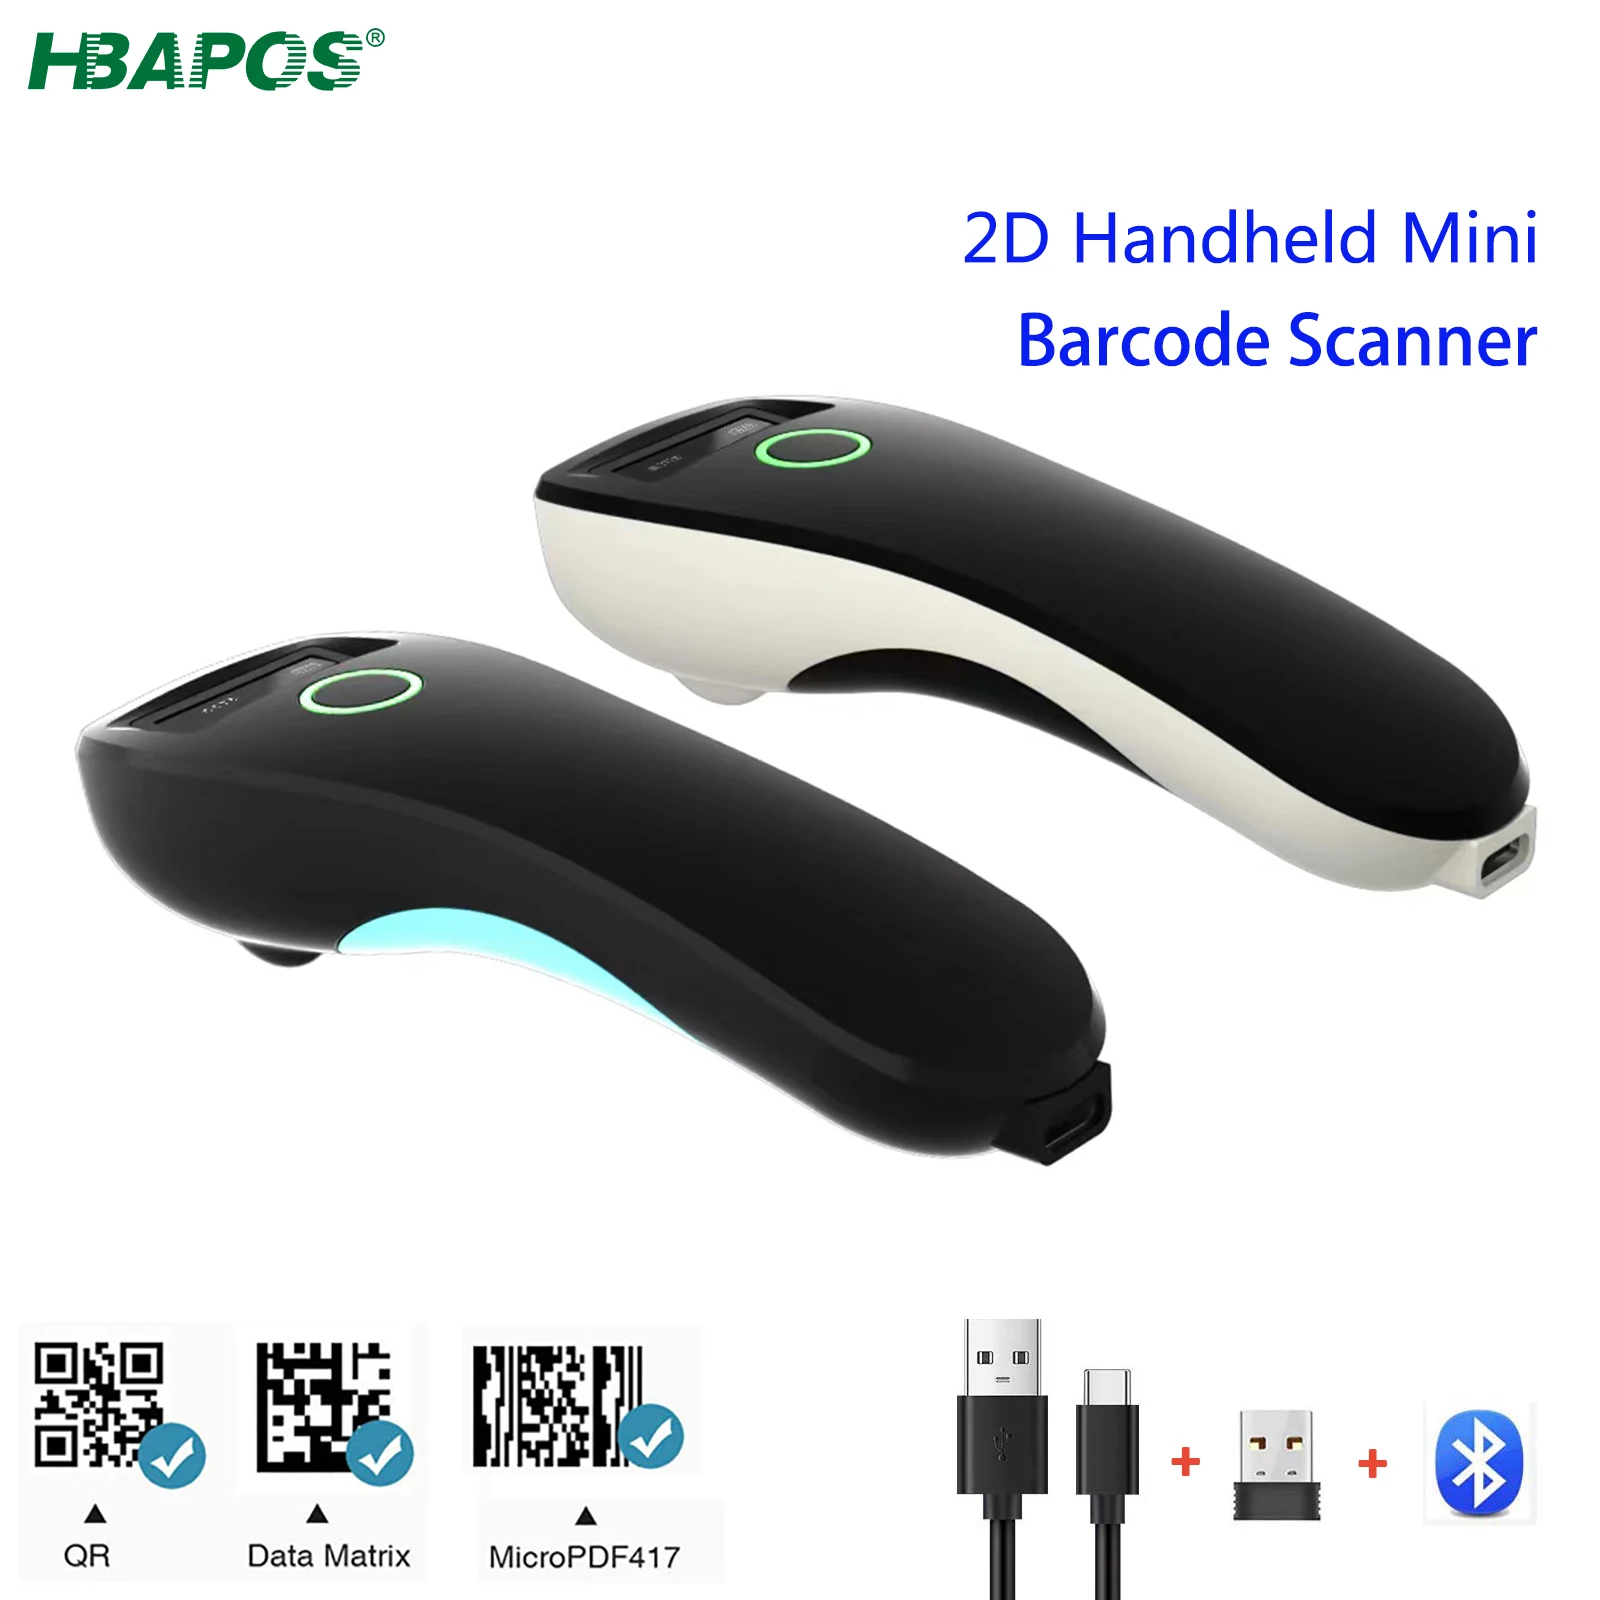 Barcode Scanner HBA-300R Wireless 1D/2D CMOS Scanner USB Bluetooth Mini Pocket QR Reader IOS Android Windows for mobile payment